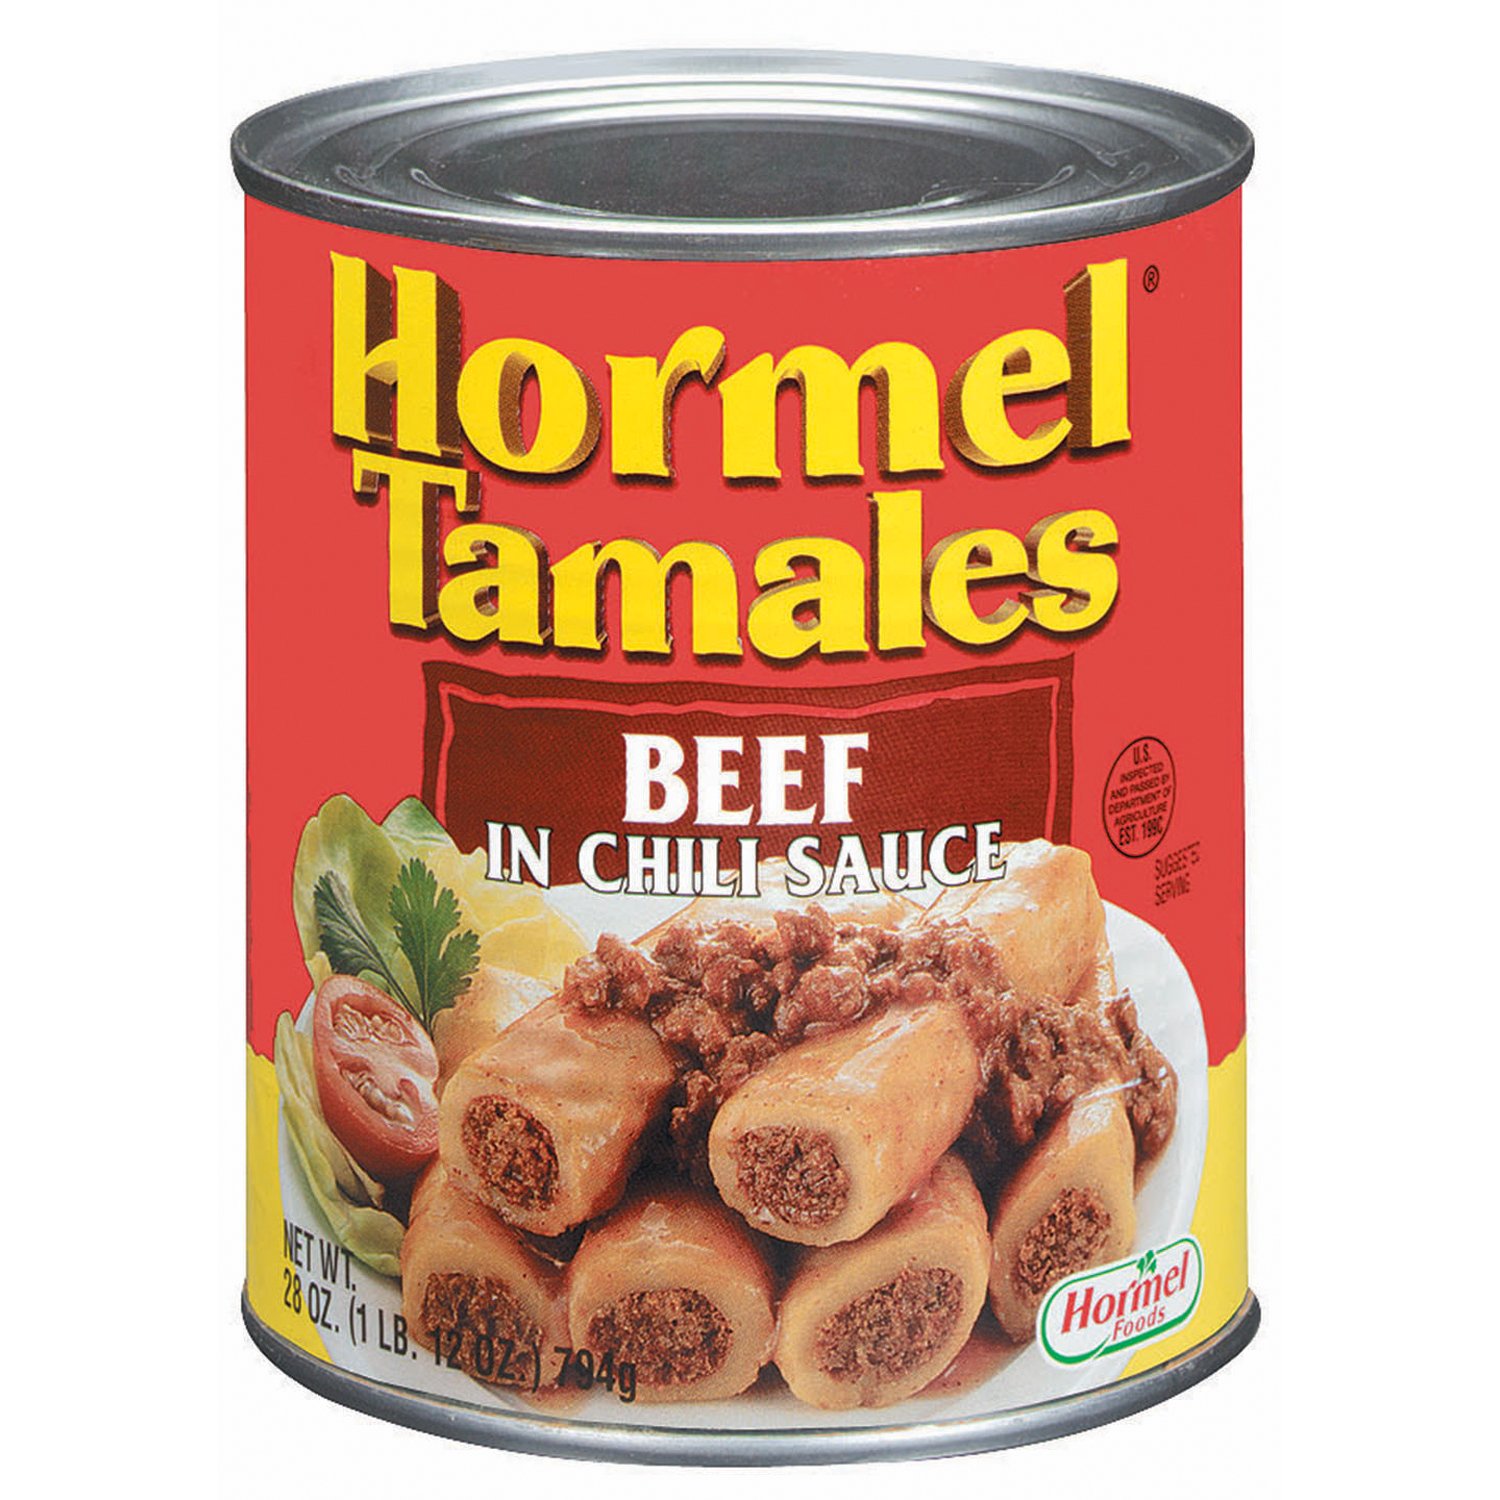 Hormel Beef Tamales in Chili Sauce - Shop Pantry Meals at H-E-B